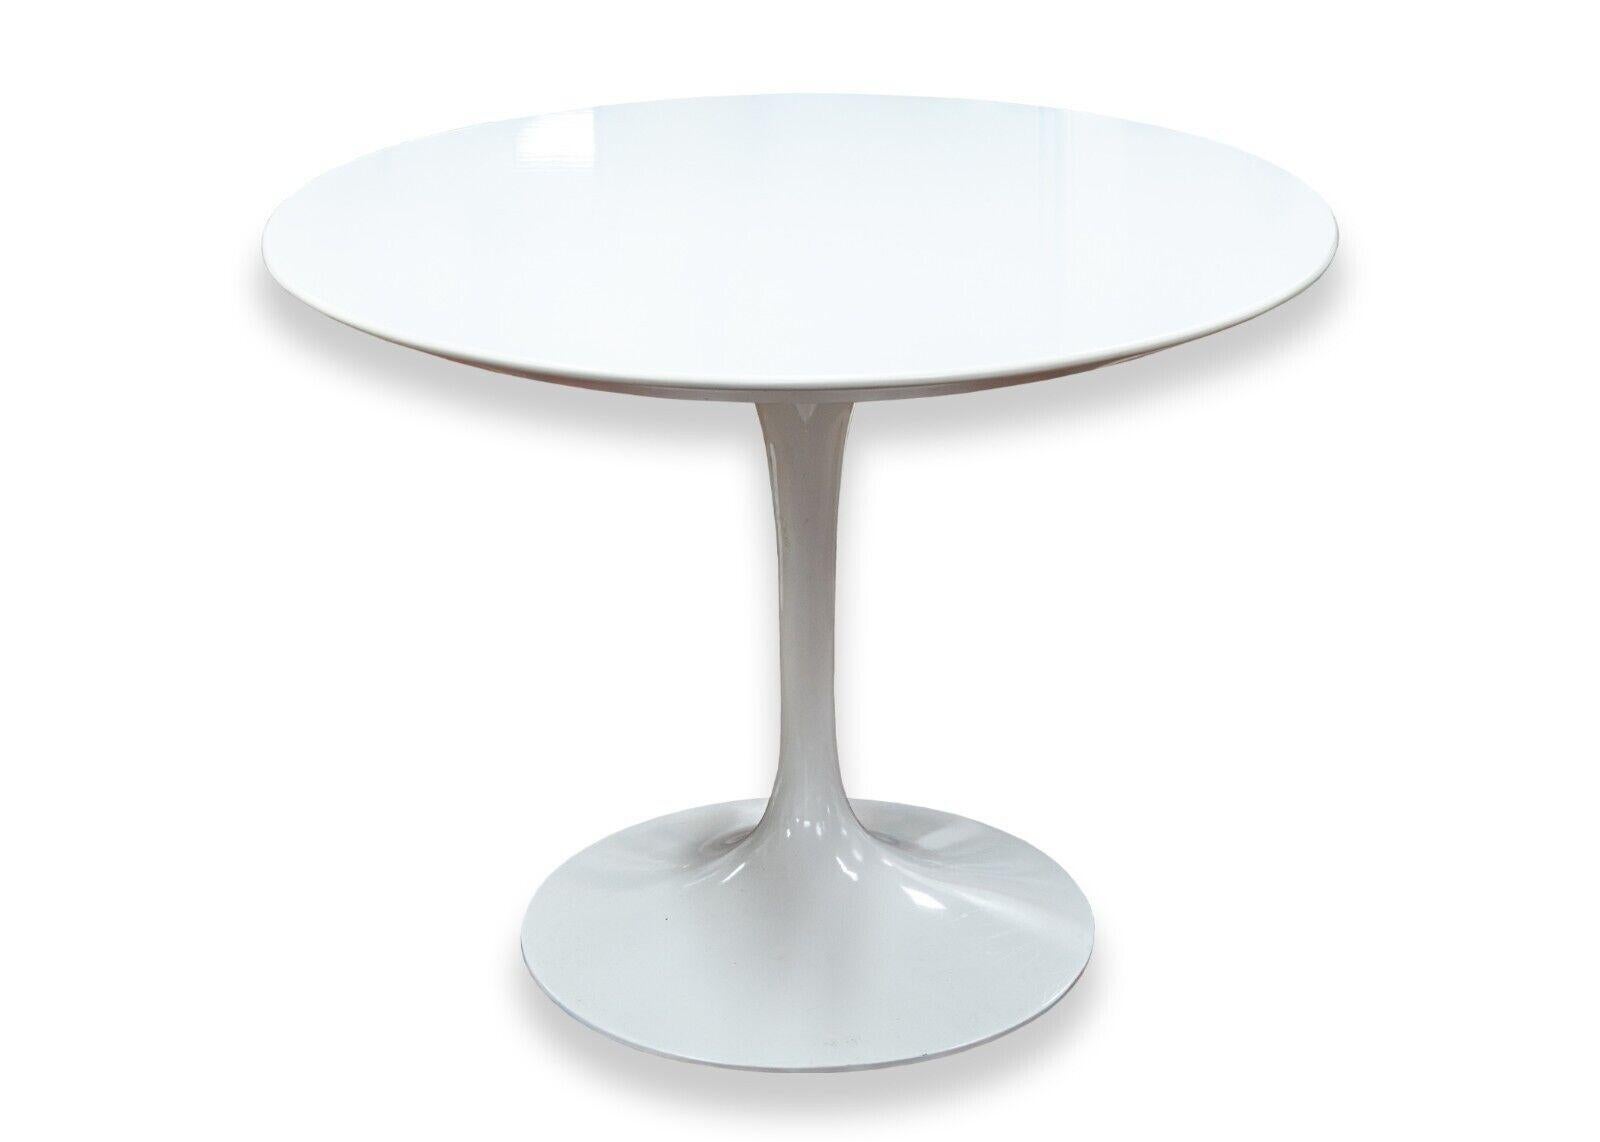 20th Century Knoll Saarinen Mid Century Modern White and Red Tulip Dining Table and Chair Set